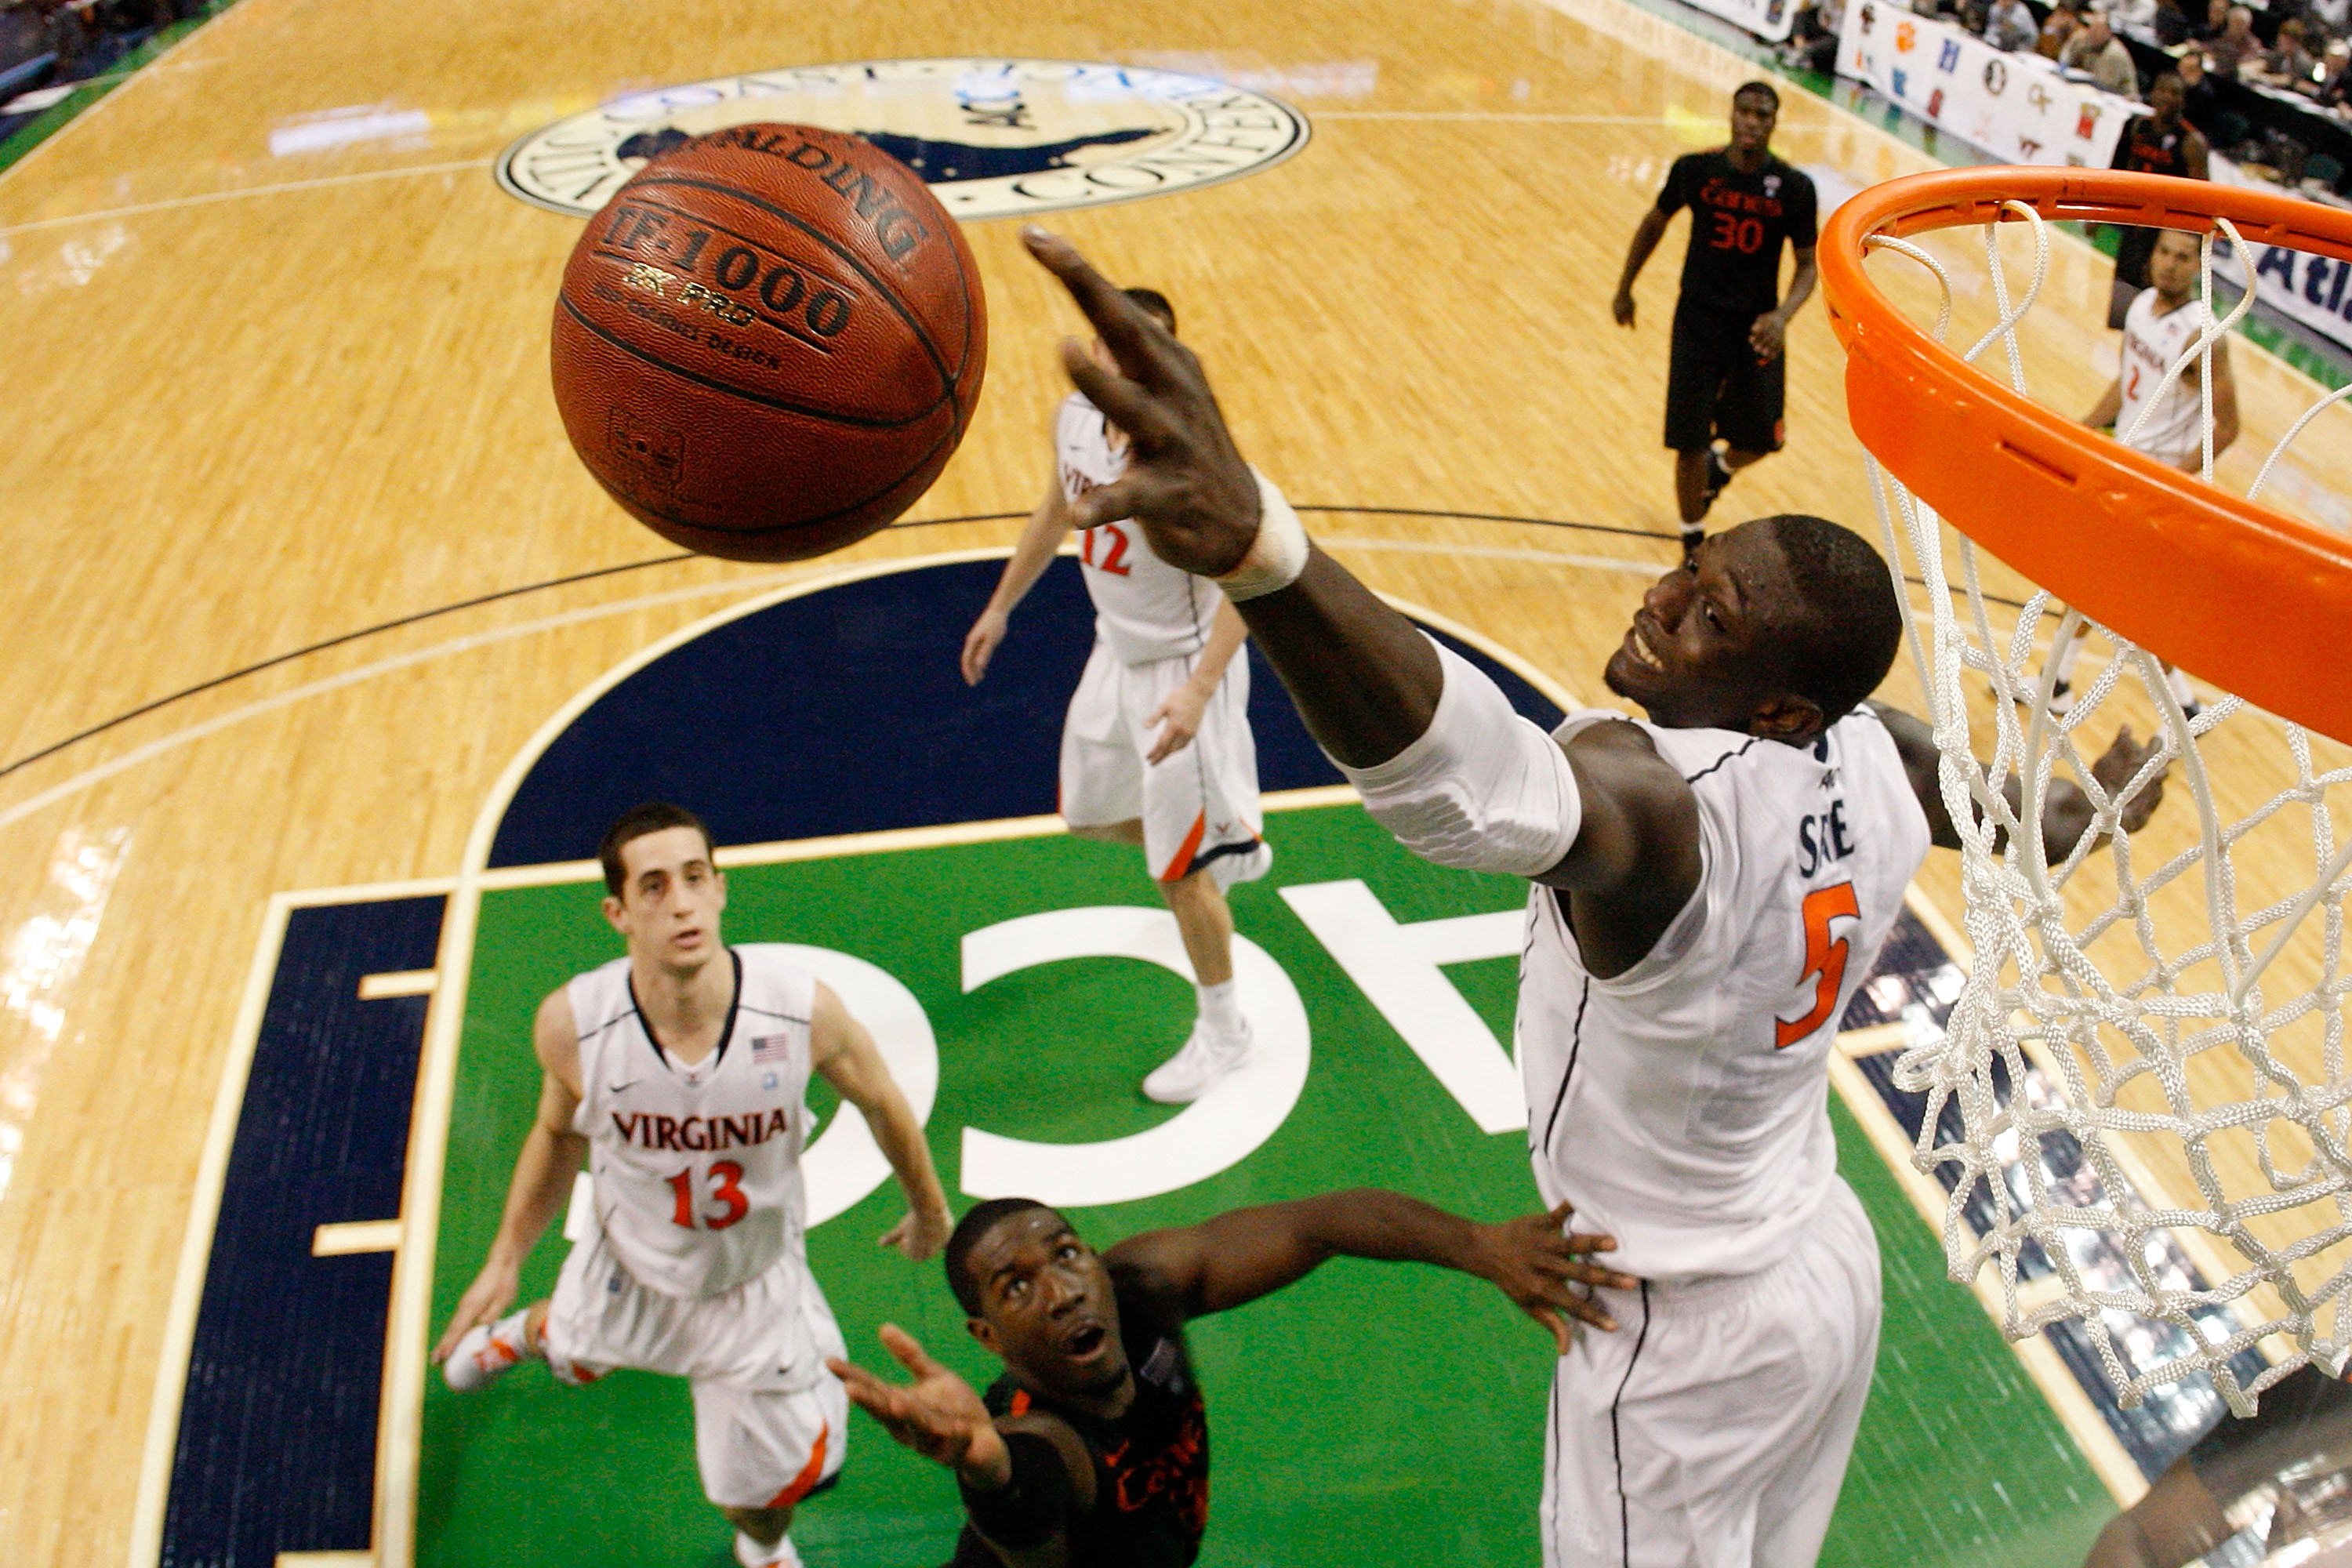 GREENSBORO, NC - MARCH 10:  Assane Sene #5 of the Virginia Cavaliers blocks a shot by during the first round of the 2011 ACC men's basketball tournament at the Greensboro Coliseum on March 10, 2011 in Greensboro, North Carolina.  (Photo by Streeter Lecka/